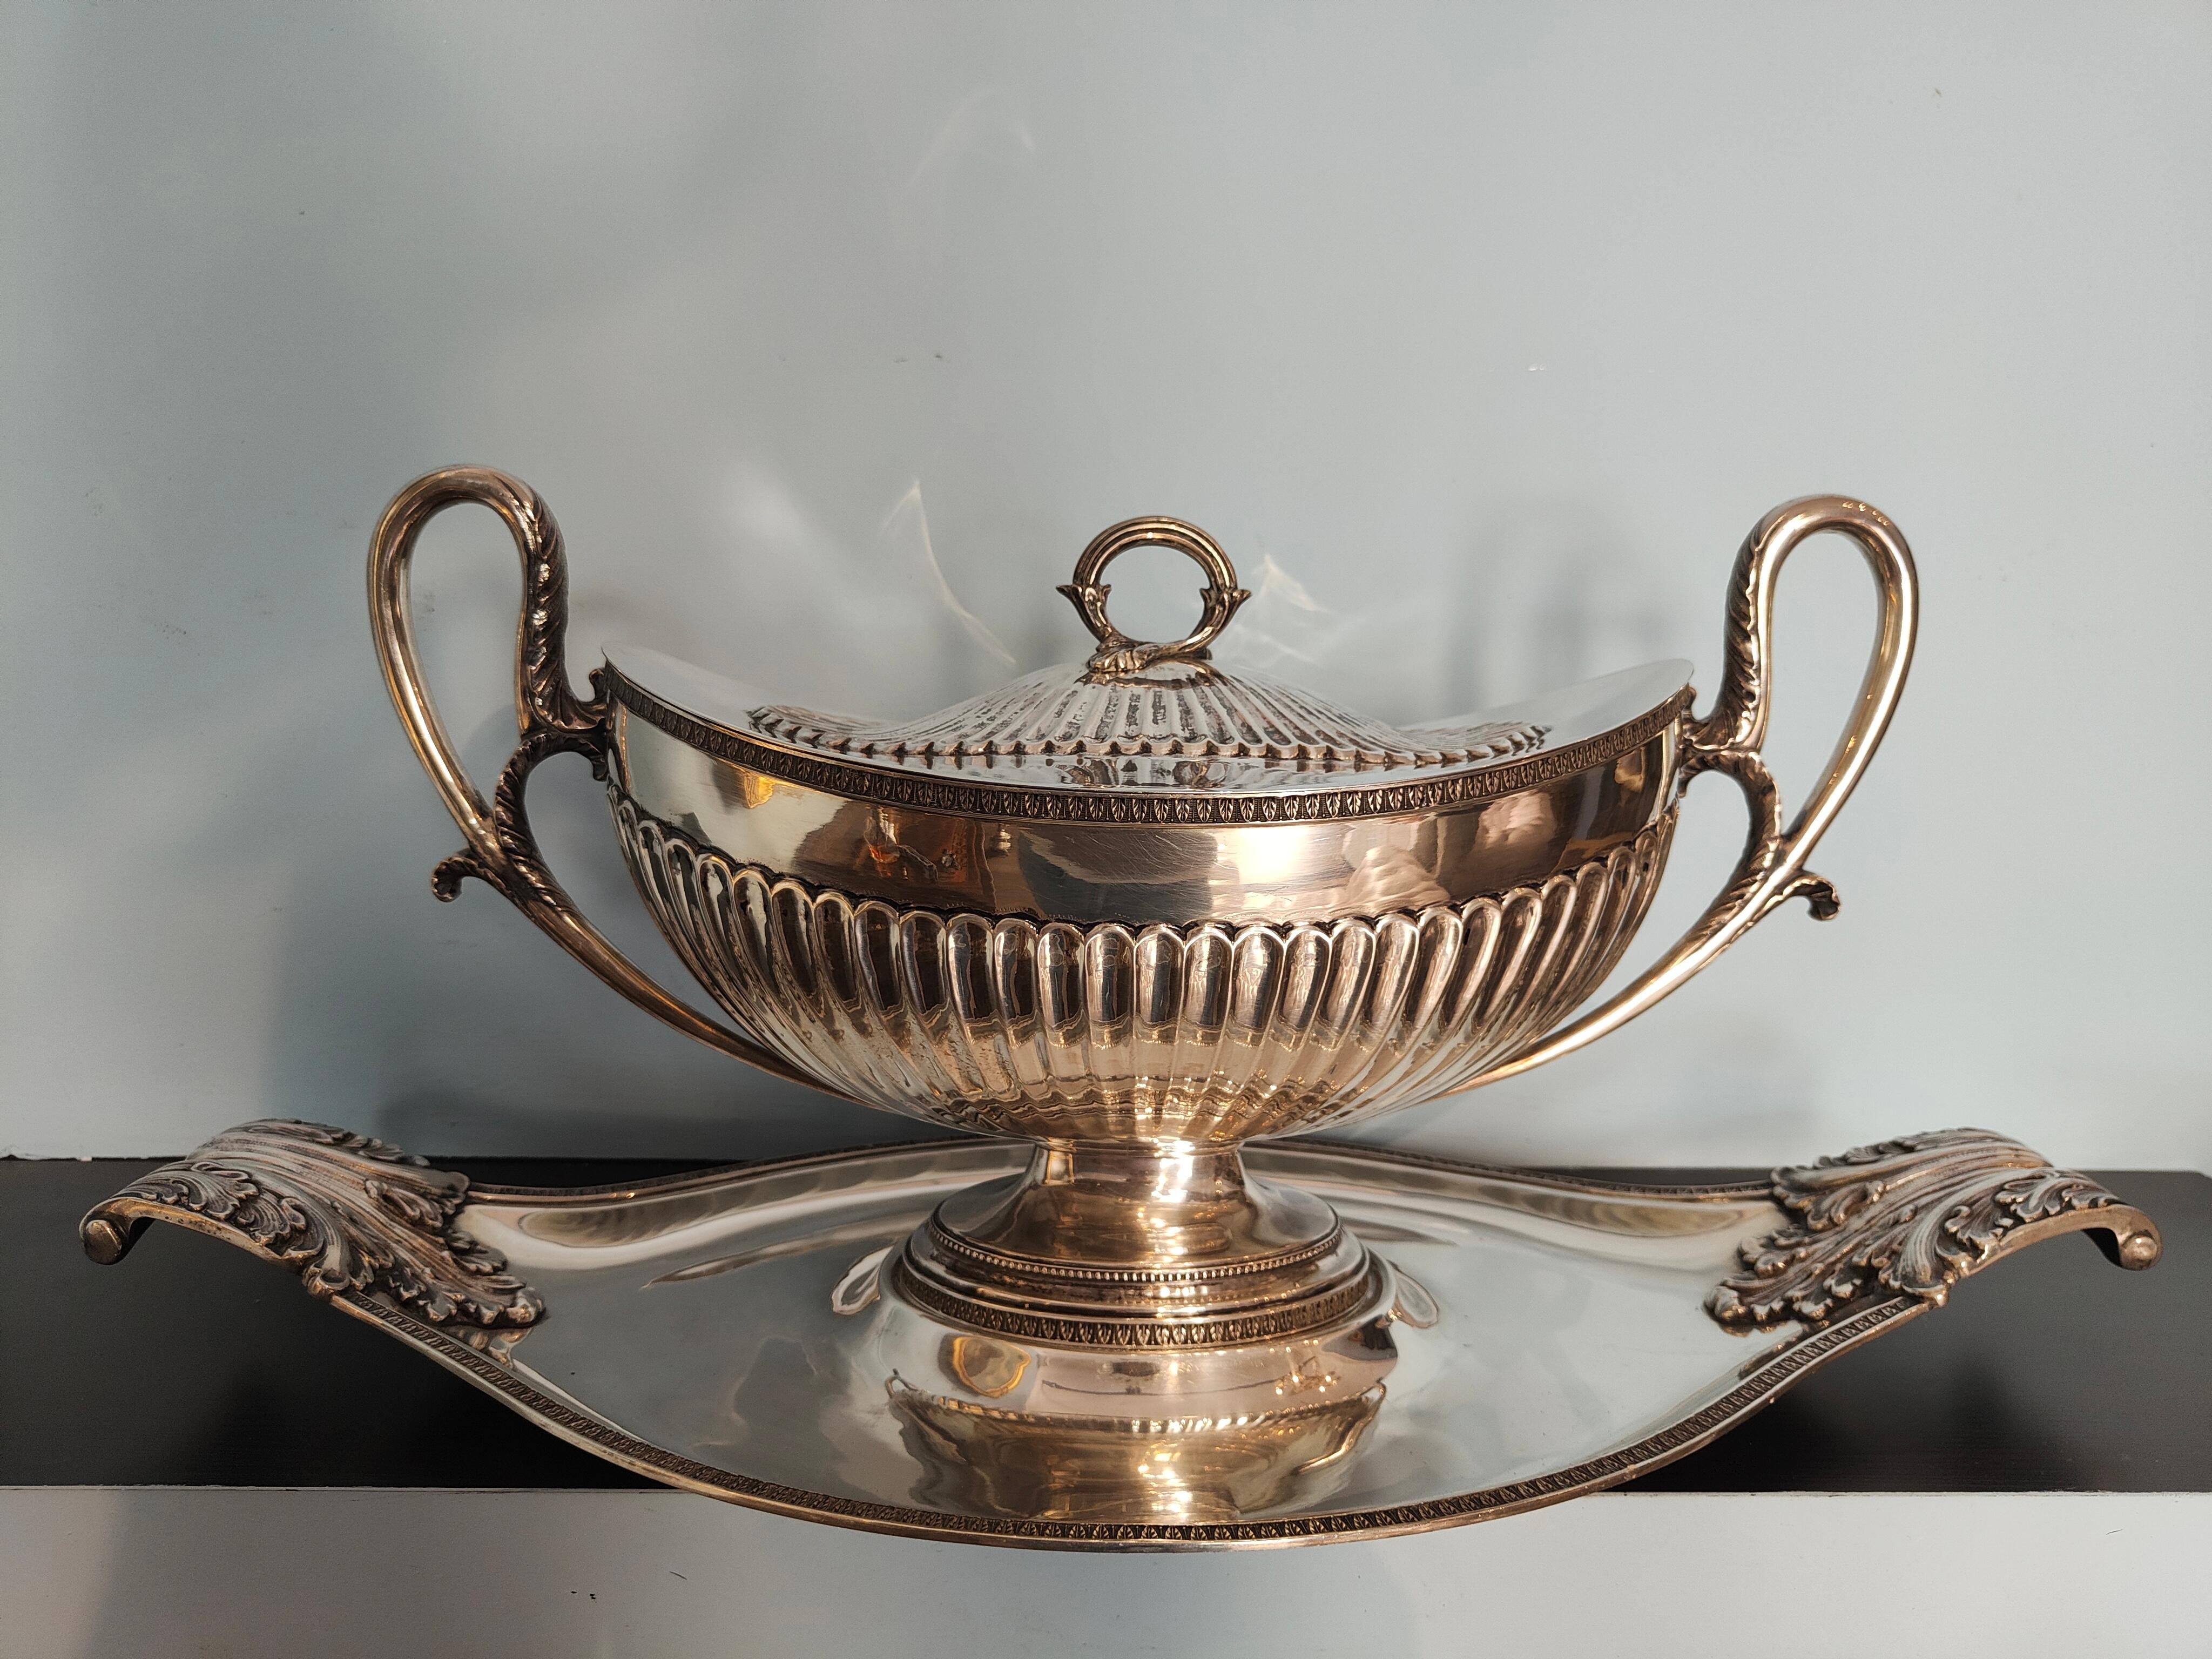 Large and elegant silver soup tureen/centerpiece with oval lid, baccellata with looped sockets on plate with sockets and acanthus leaves.
The object lends itself to various functions: for purely ornamental use, to enrich a table; as a container for